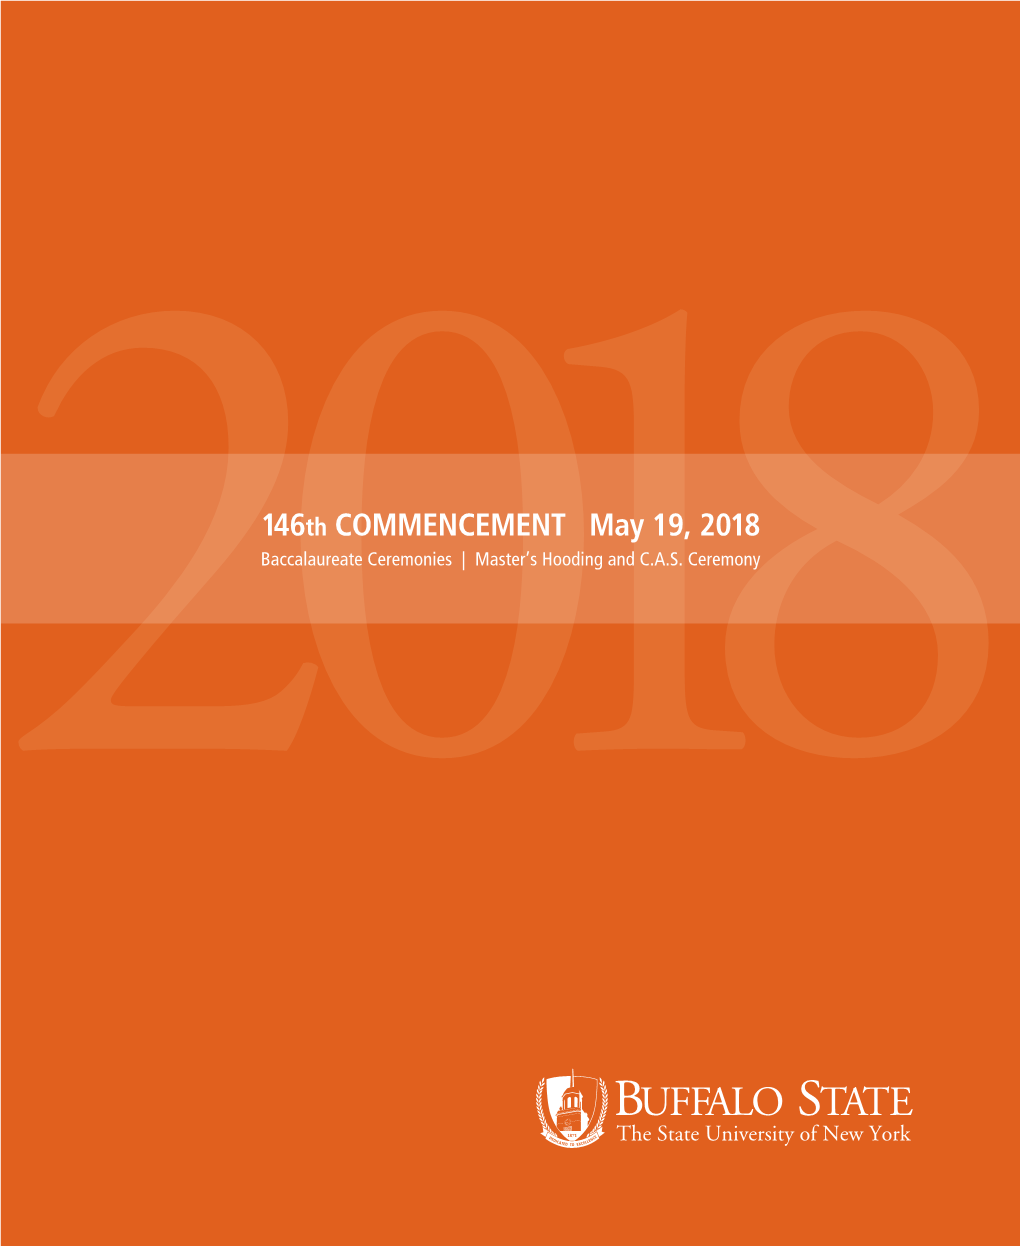 2018146Th COMMENCEMENT May 19, 2018